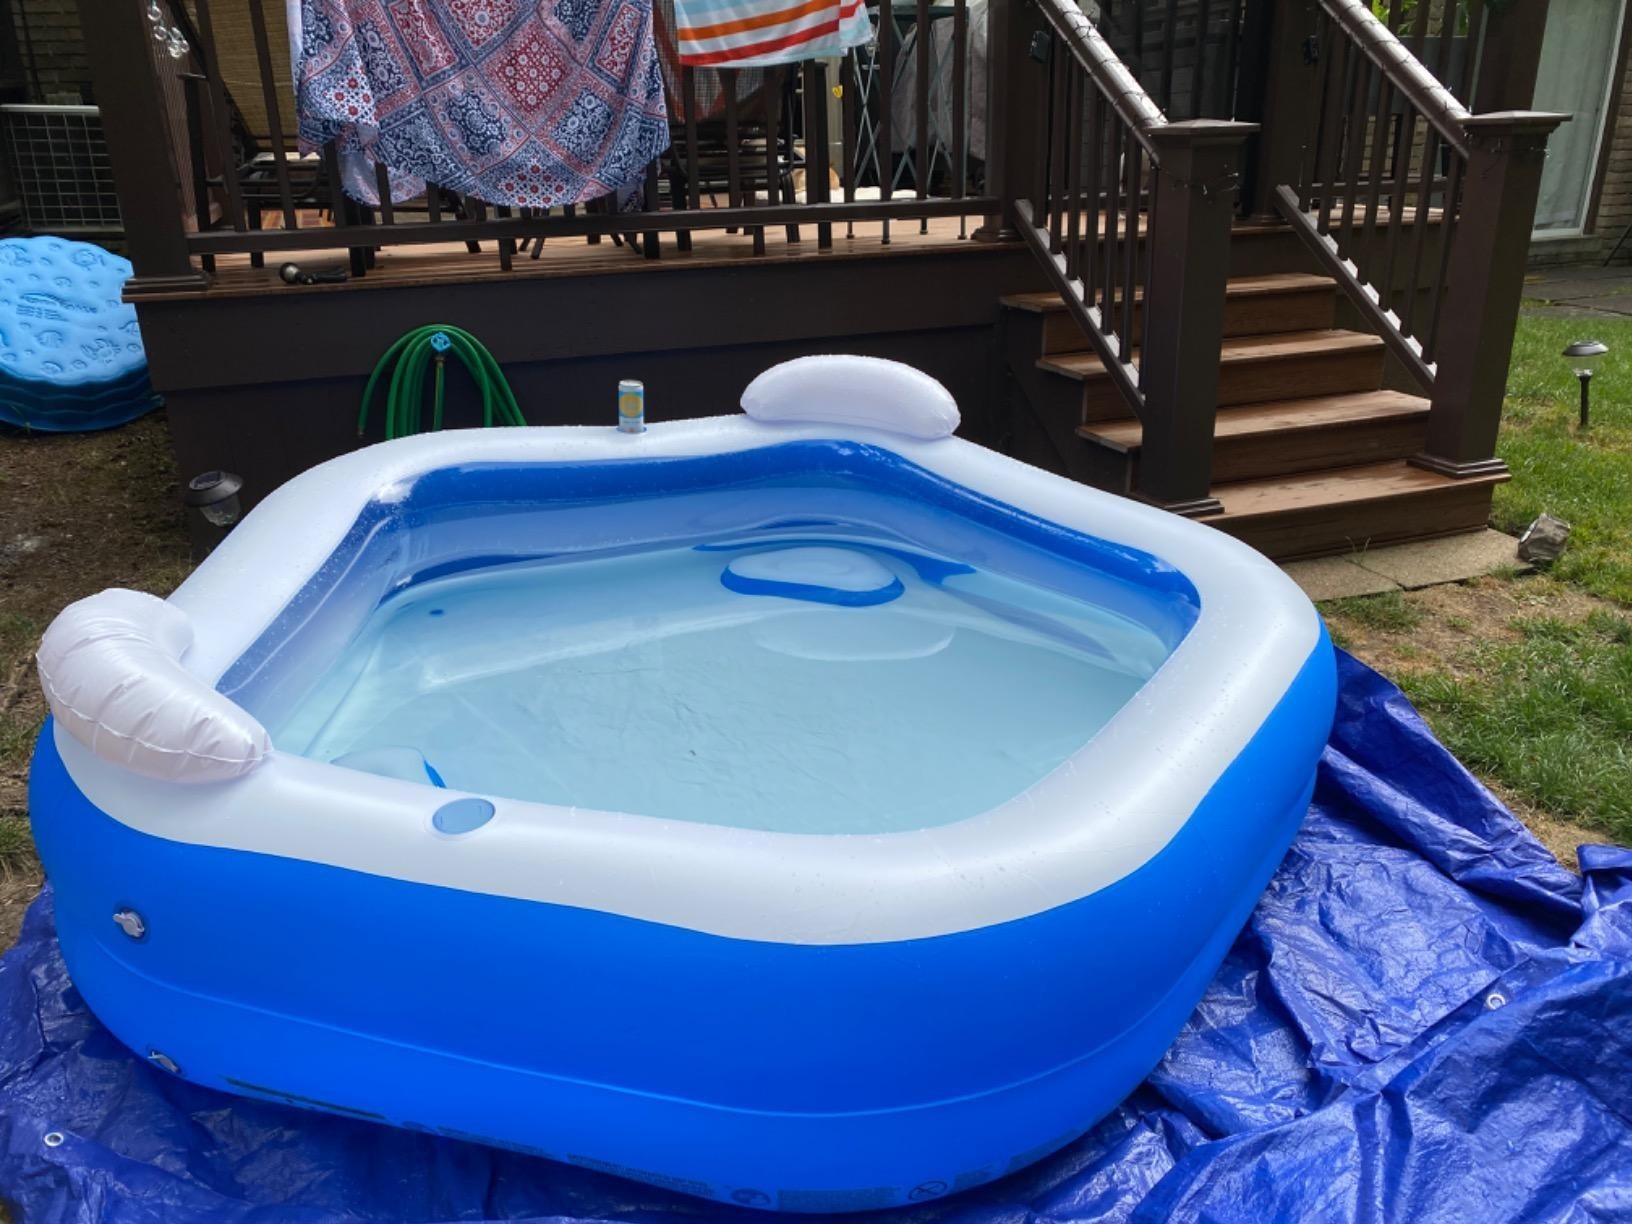 A reviewer showing that the pool has two backrests and cup holders in the side